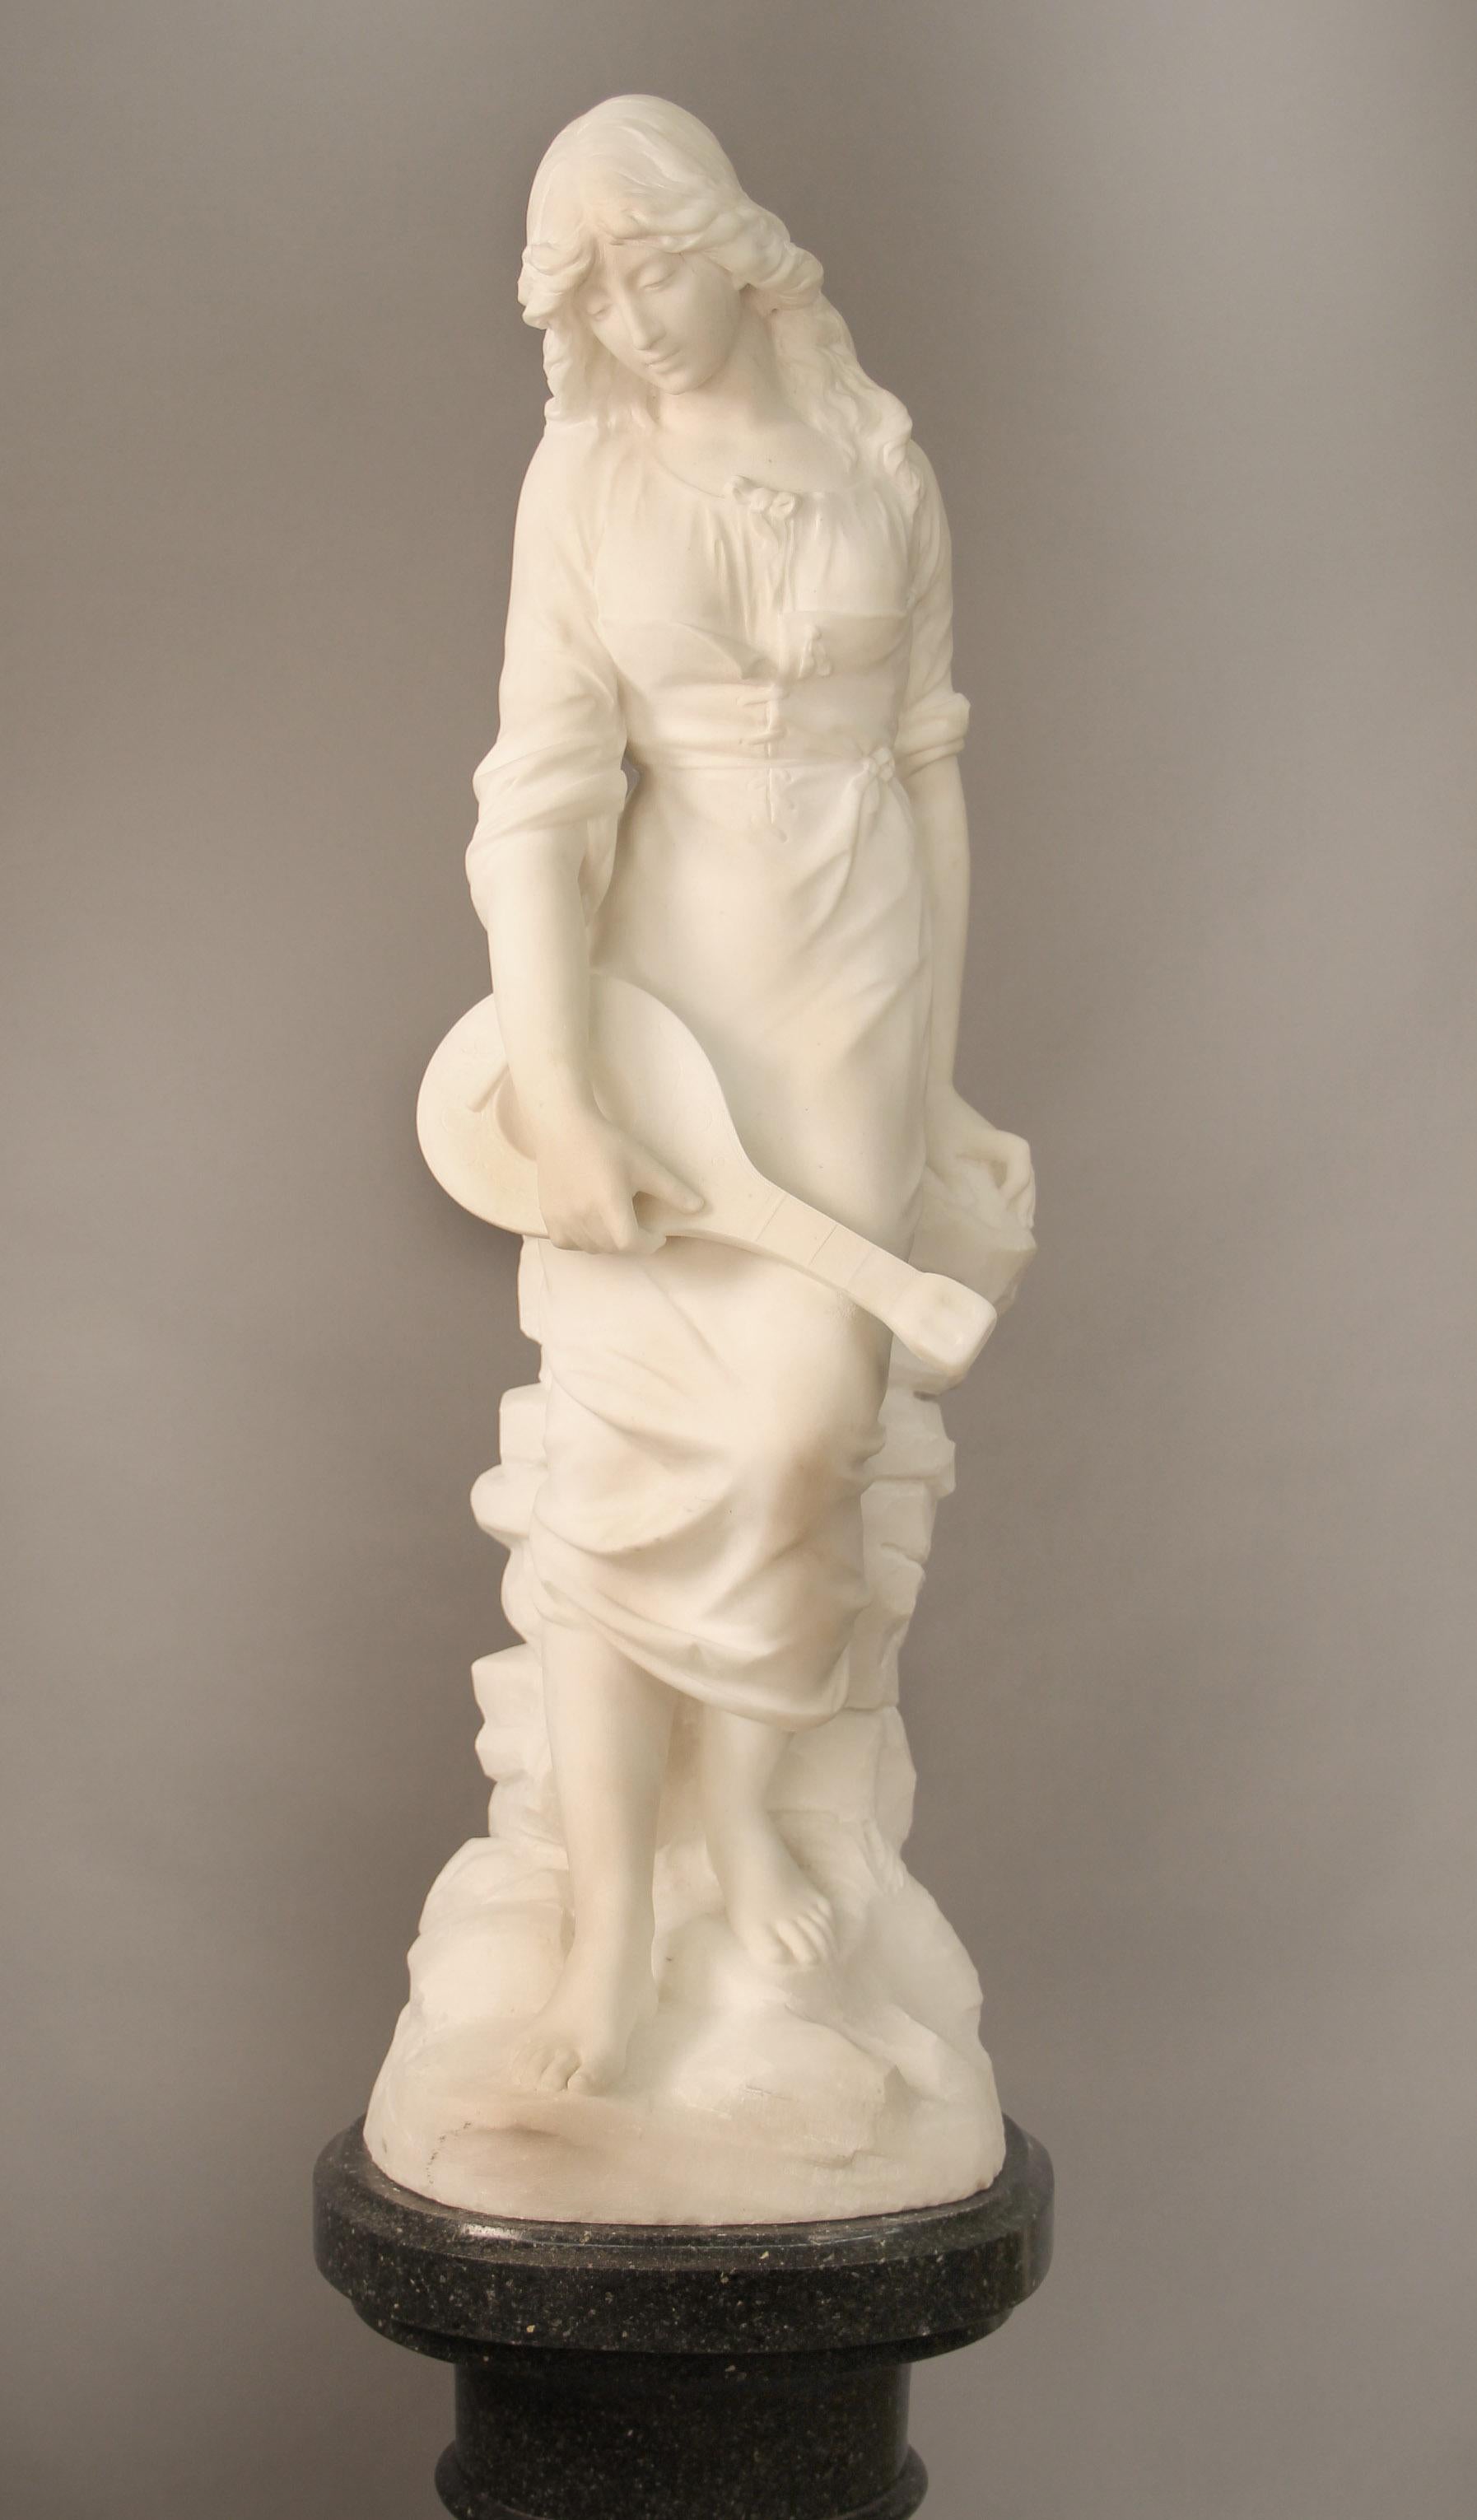 A beautiful late 19th century French white Carrara marble of a woman and her Mandolin

Signed Paul Fournier

Paul Fournier (French, 1859–1926), made many full size and busts of women in the late 19th century. His works are rare and remain